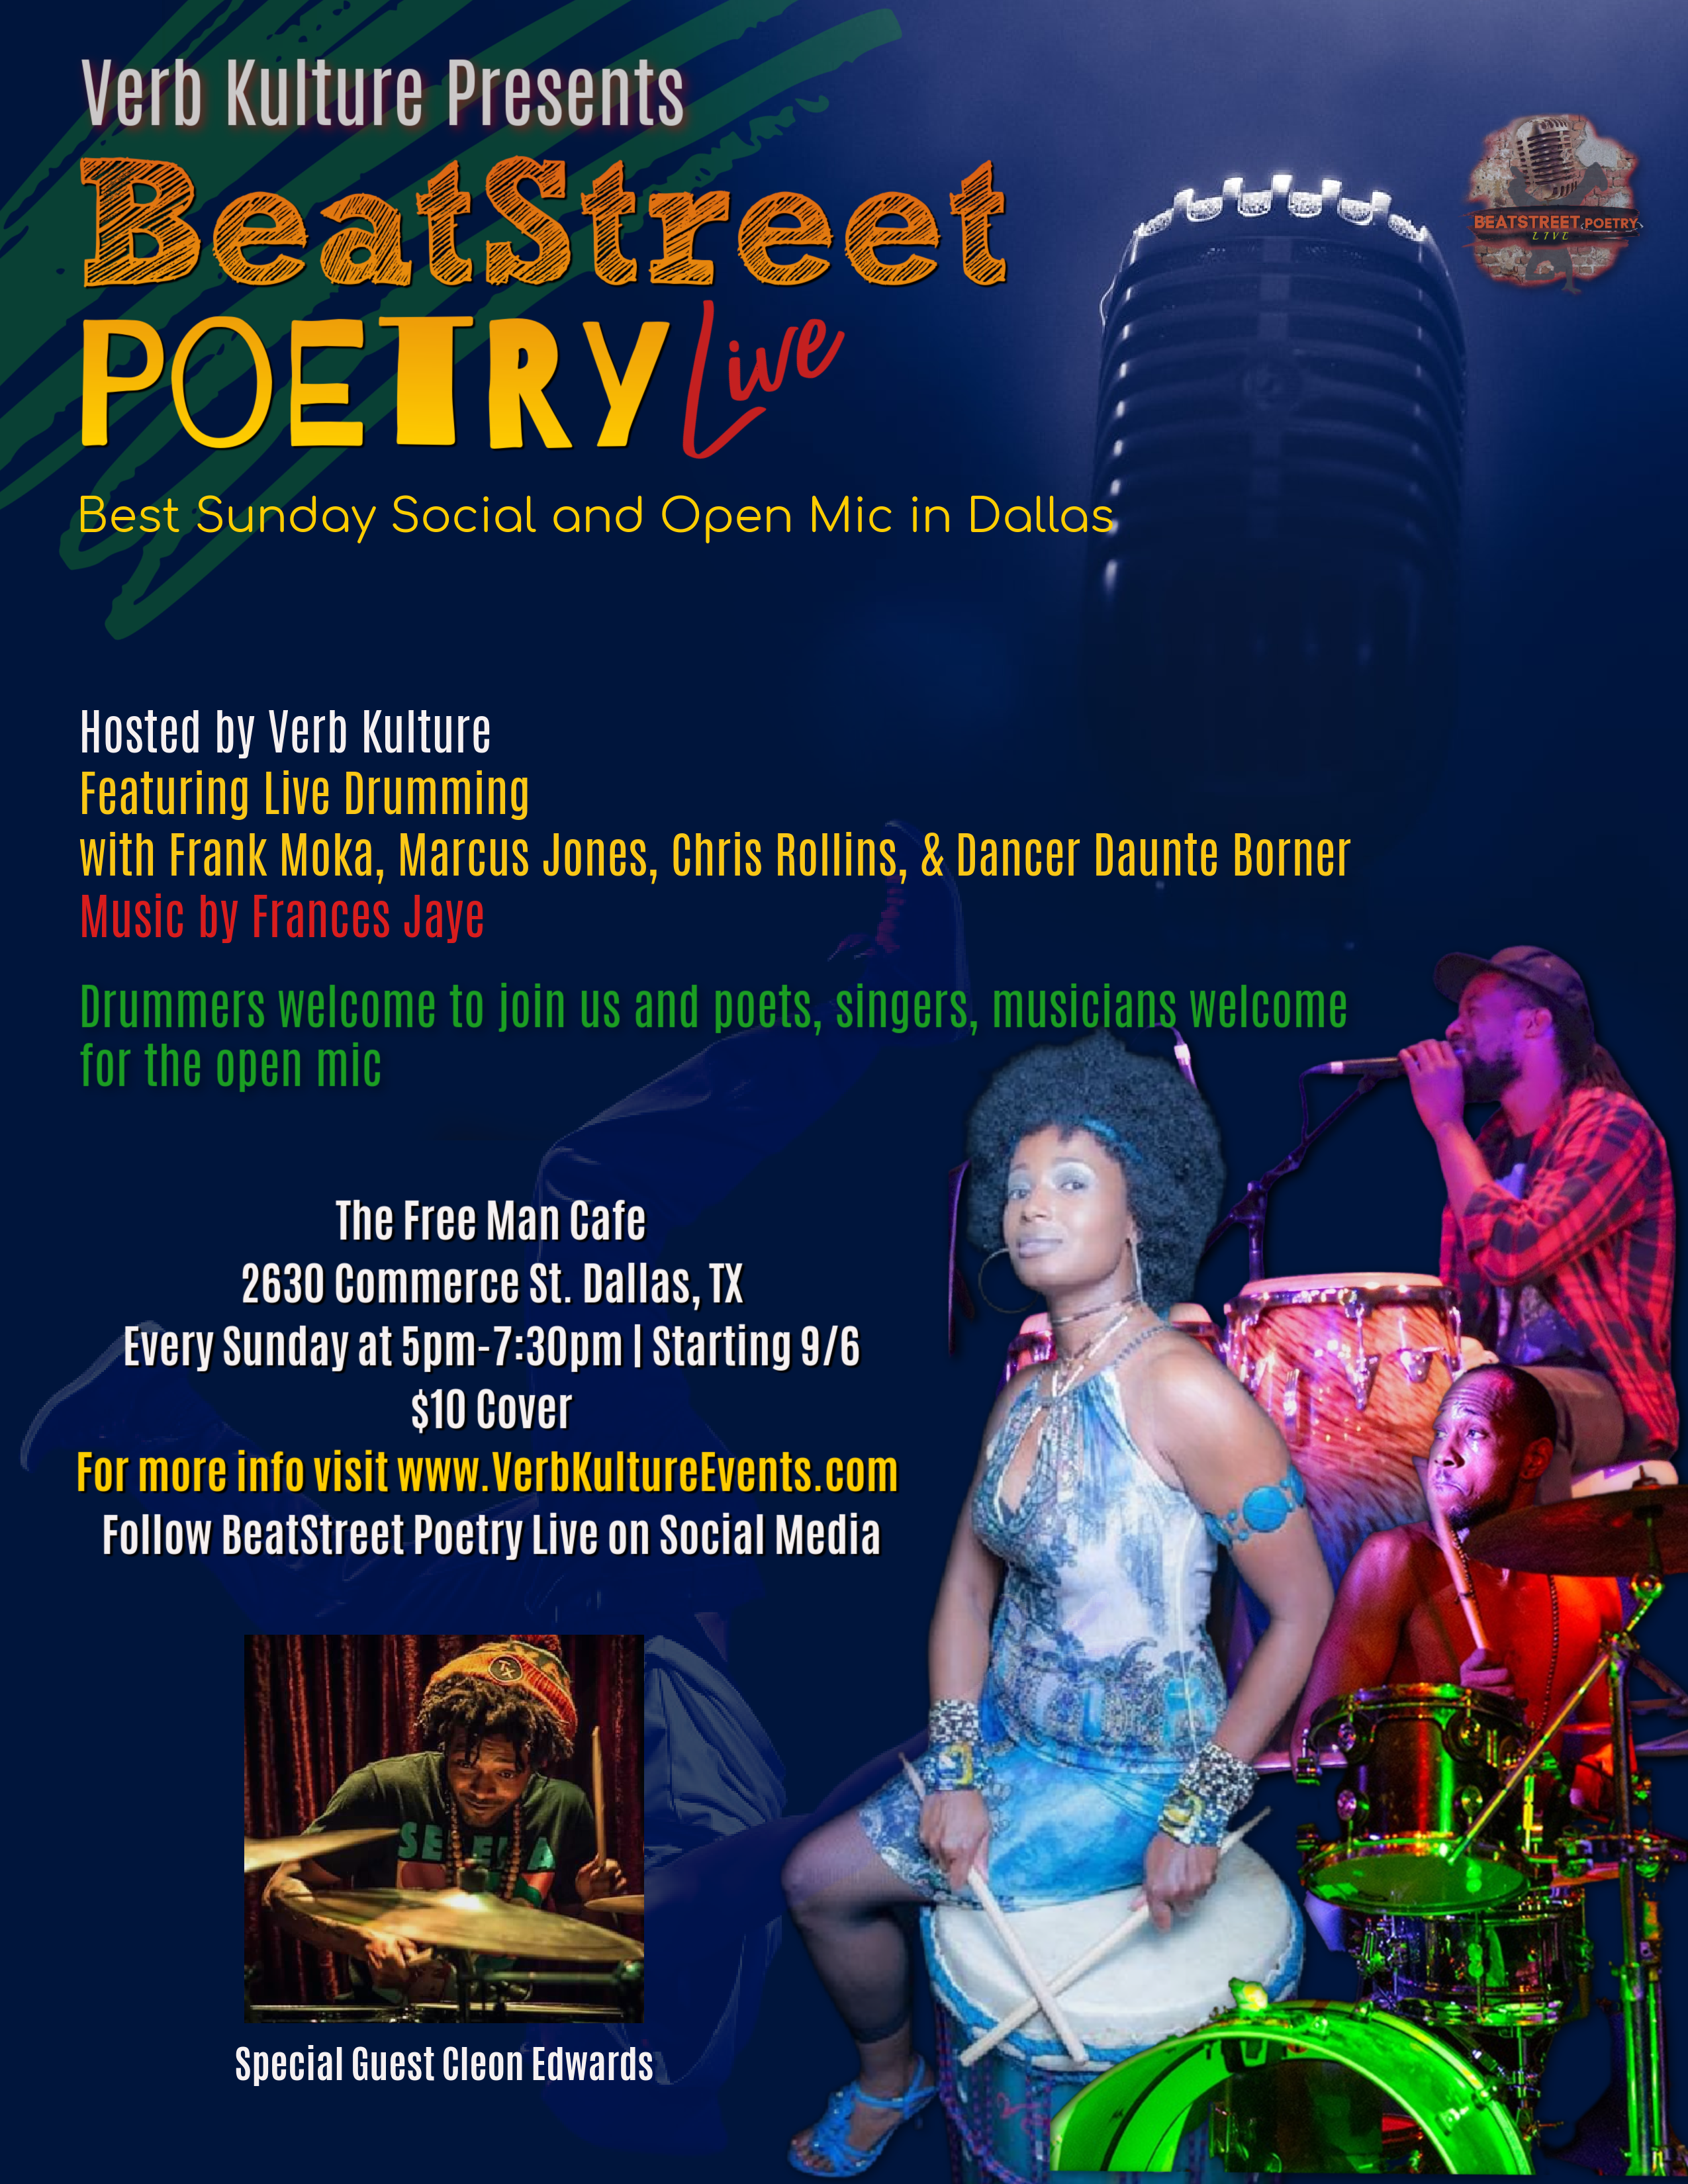 BeatStreet Poetry Live (Best Sunday Social and Open Mic in Dallas)